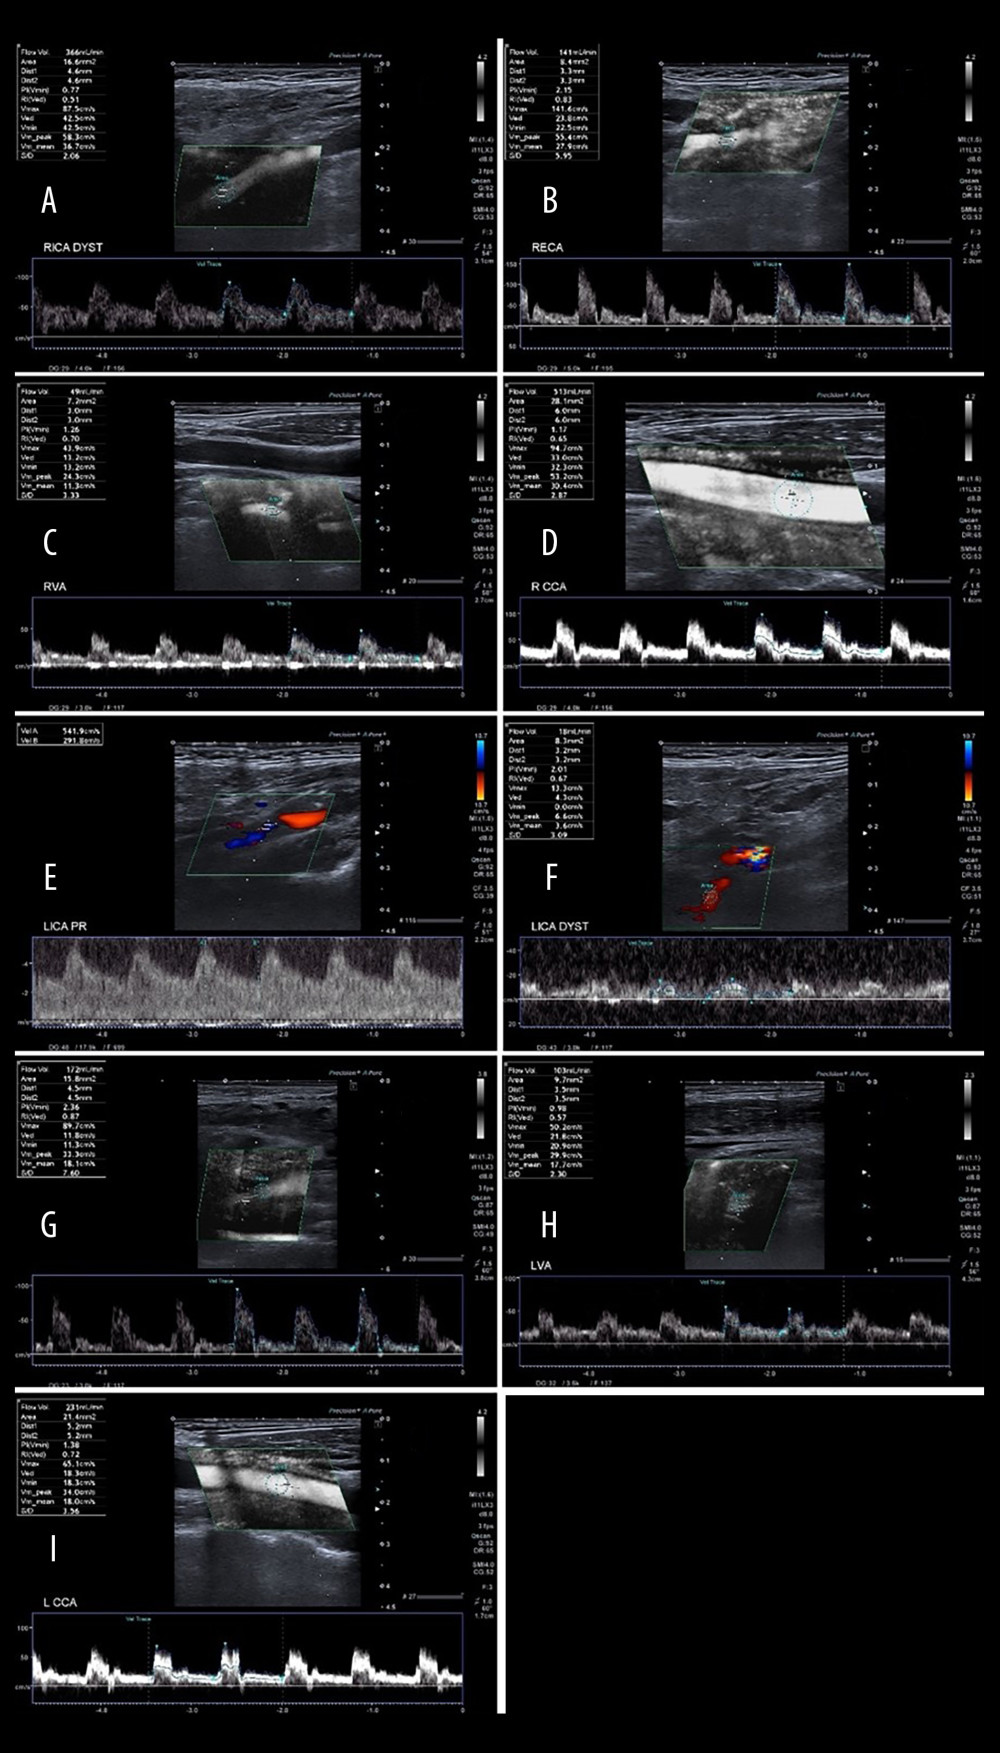 A 65-year-old patient with severe left ICA stenosis. Preoperative measurements: A – RICA flow 366 ml/min, B – RECA – flow 141 ml/min, C – RVA – flow 49 ml/min, D – RCCA flow 513 ml/min, E – LICA stenosis with flow velocity 5.42/2.92 m/s, F – distal part of the LICA with flow reduction 18 ml/min, G – LECA flow 172 ml/min, H – LVA flow 103 ml/min, I – LCCA flow 231 ml/min. Total preoperative CBF of 849 ml/min.